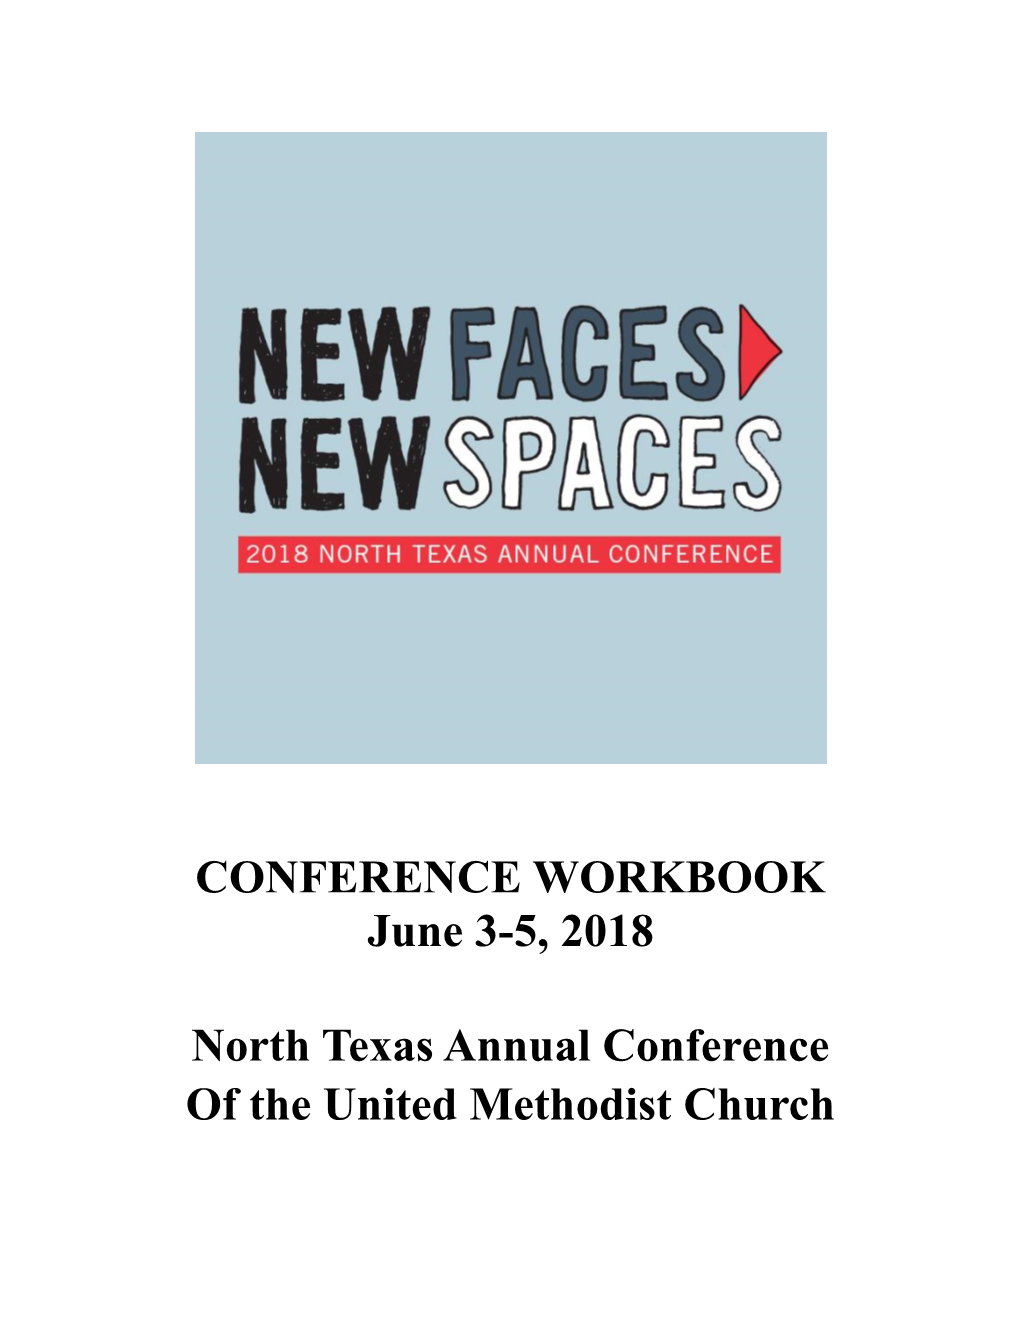 CONFERENCE WORKBOOK June 3-5, 2018 North Texas Annual